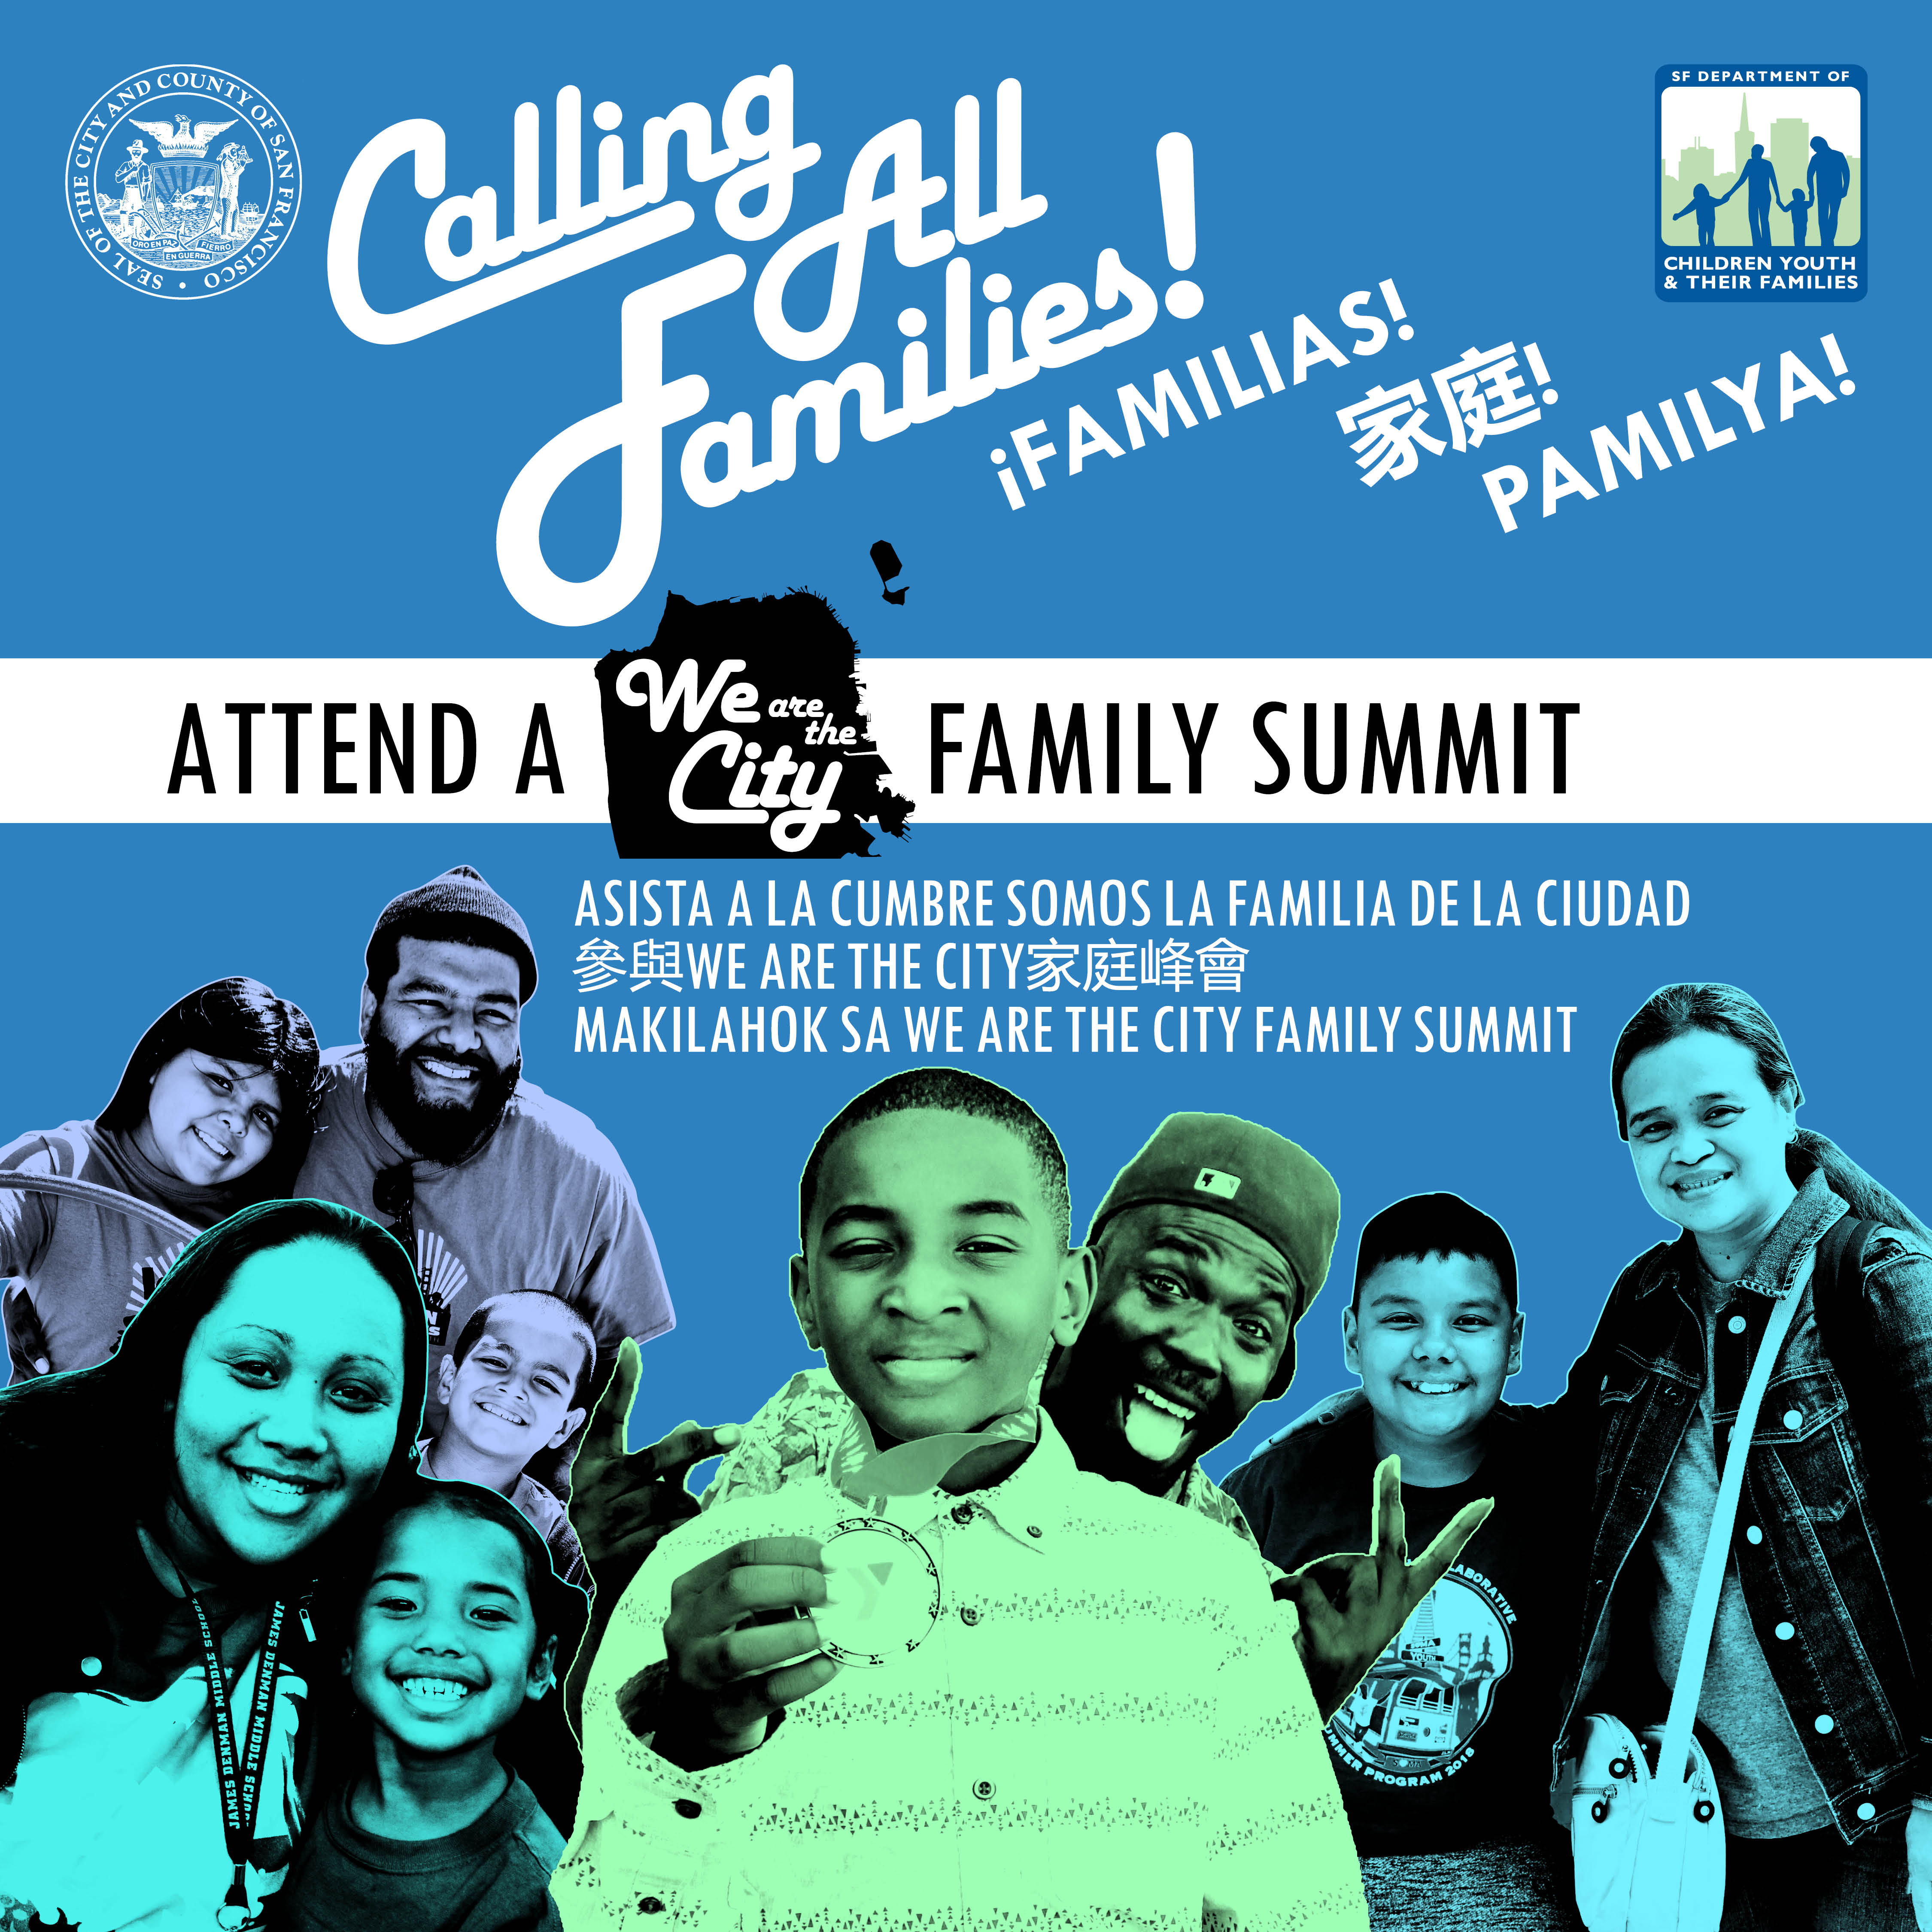 Informational poster of family summit hosted by the department of child, youth, and their families.